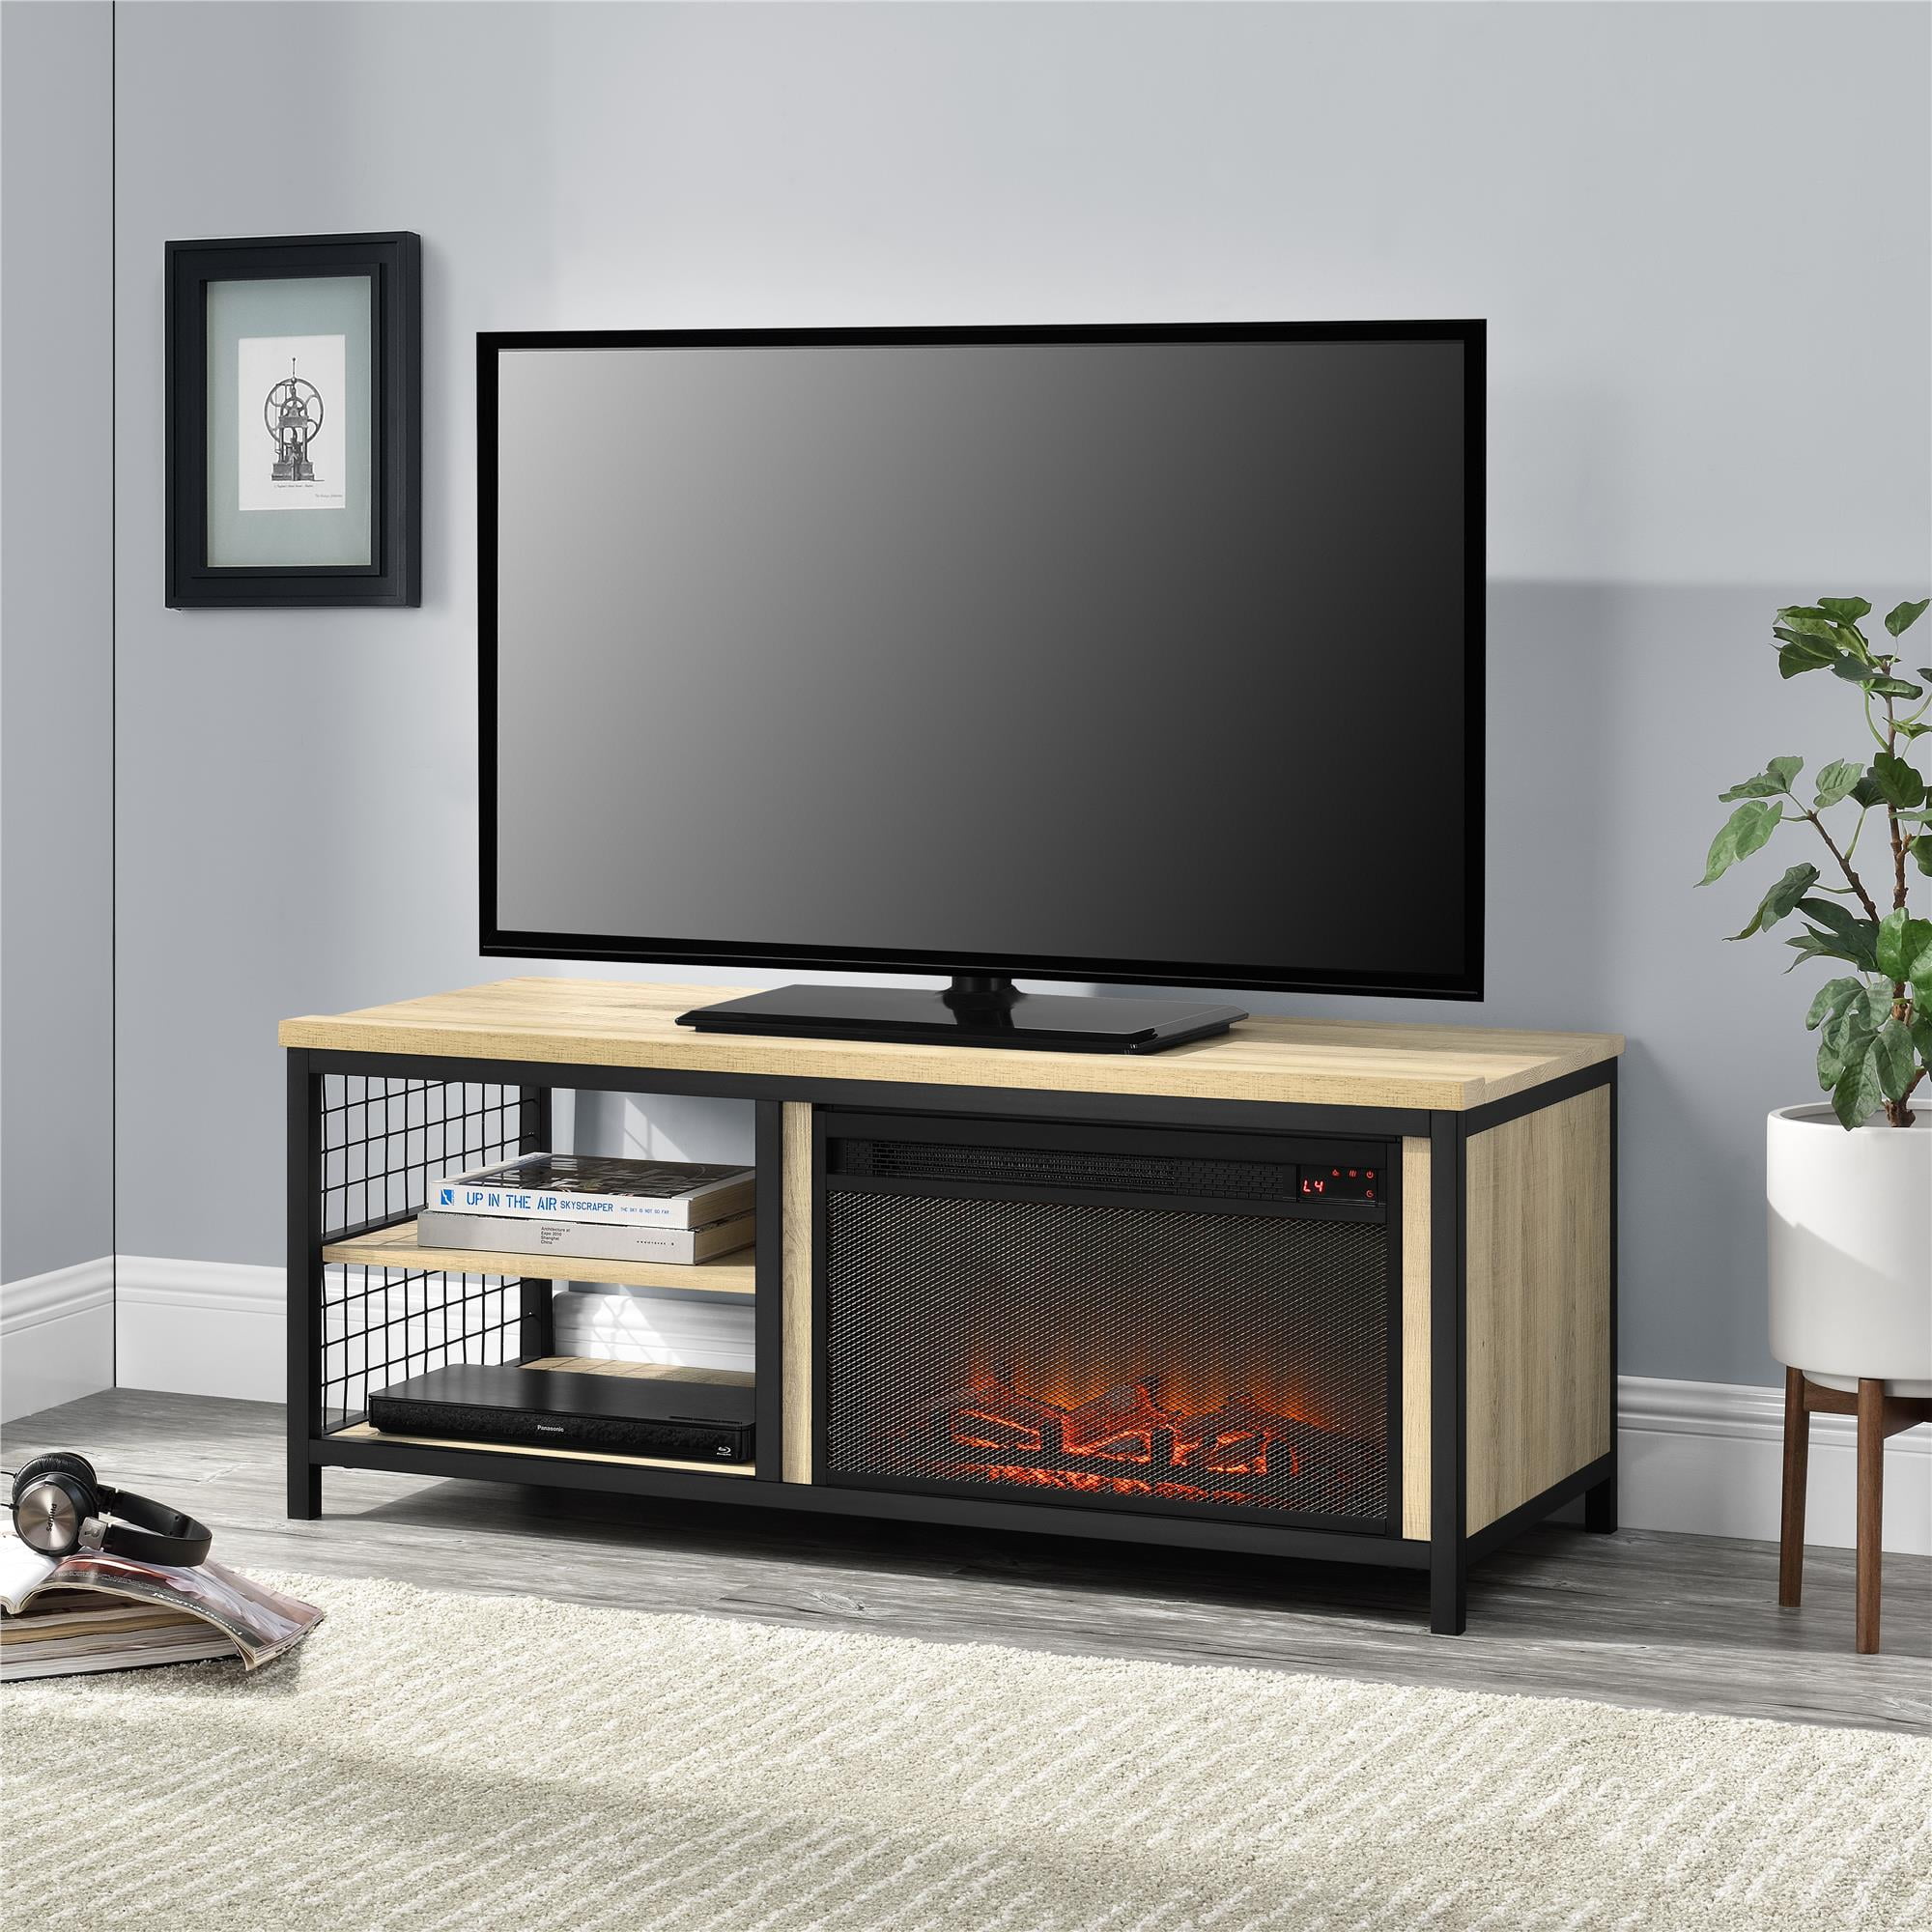 Ameriwood Home Broadview Fireplace TV Stand for TVs up to 55", Golden